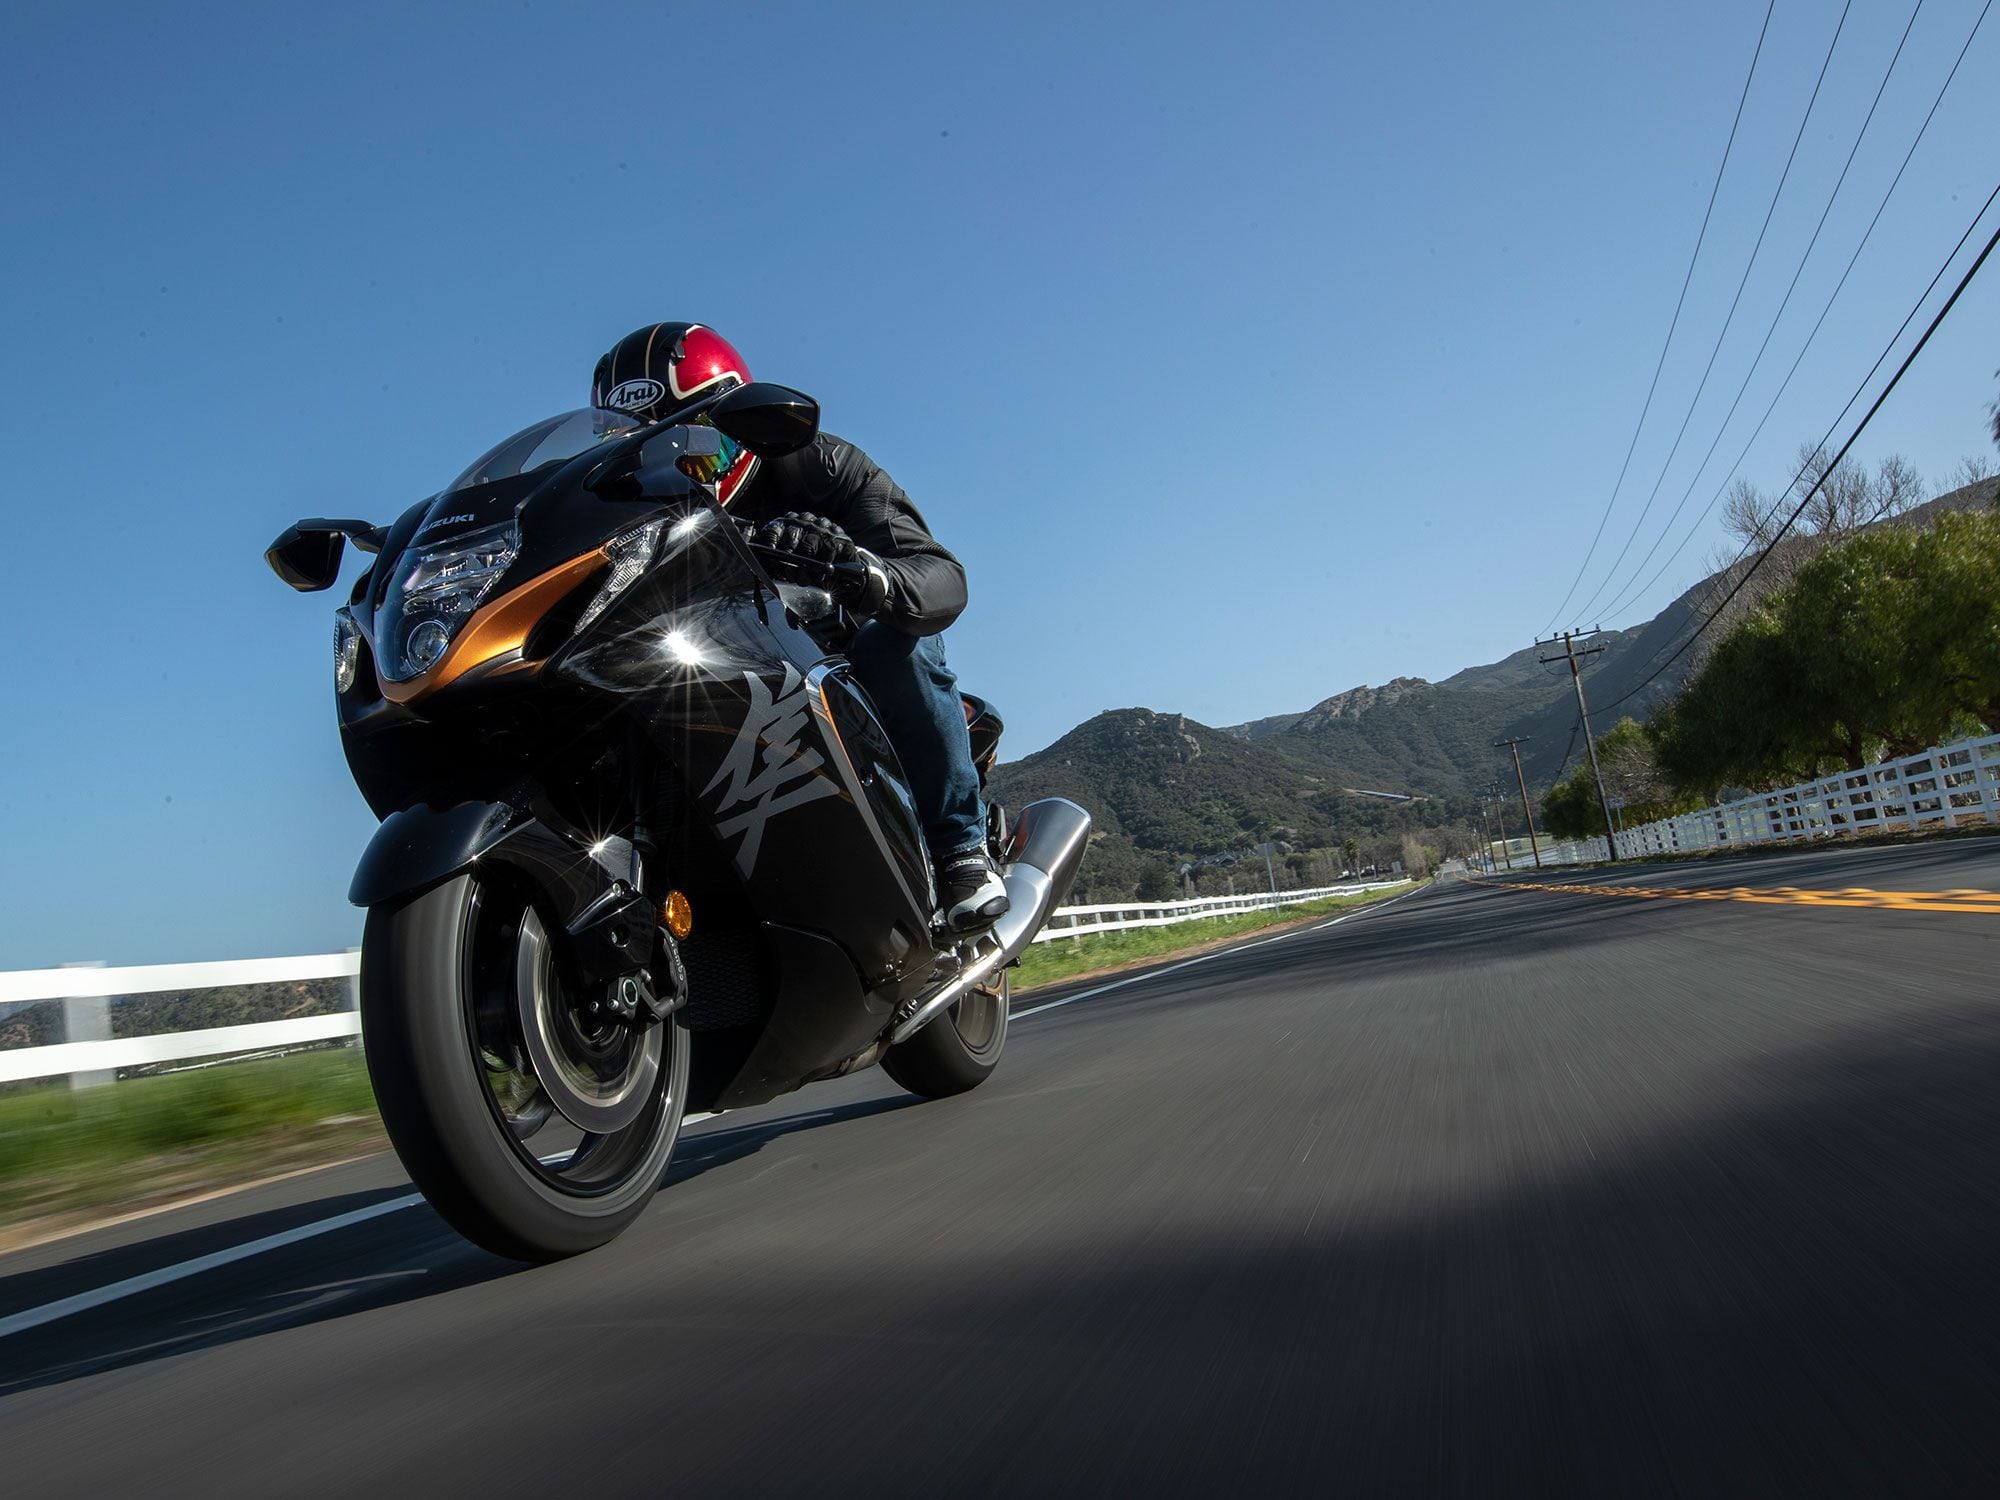 The 2022 Suzuki GSX1300RR Hayabusa is re-engineered and restyled with changes aimed at increasing “real world” performance and maintaining the Hayabusa legend. We did go fast this day, but here we’re going about 28 mph. It’s the job.